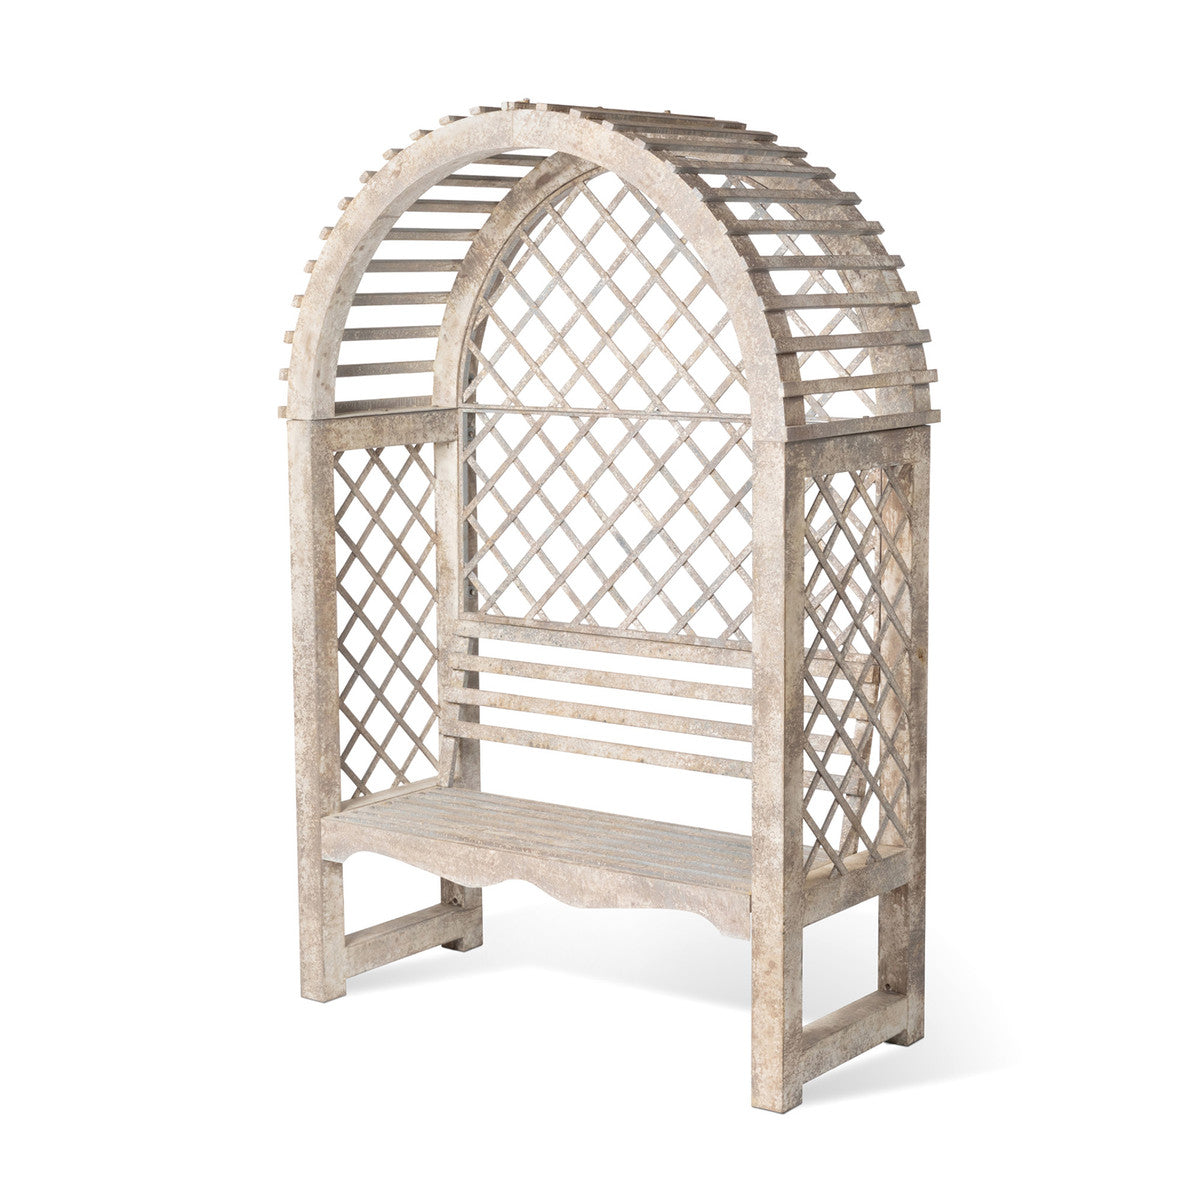 Arch garden trellis with seat, Iron arch arbor with seat